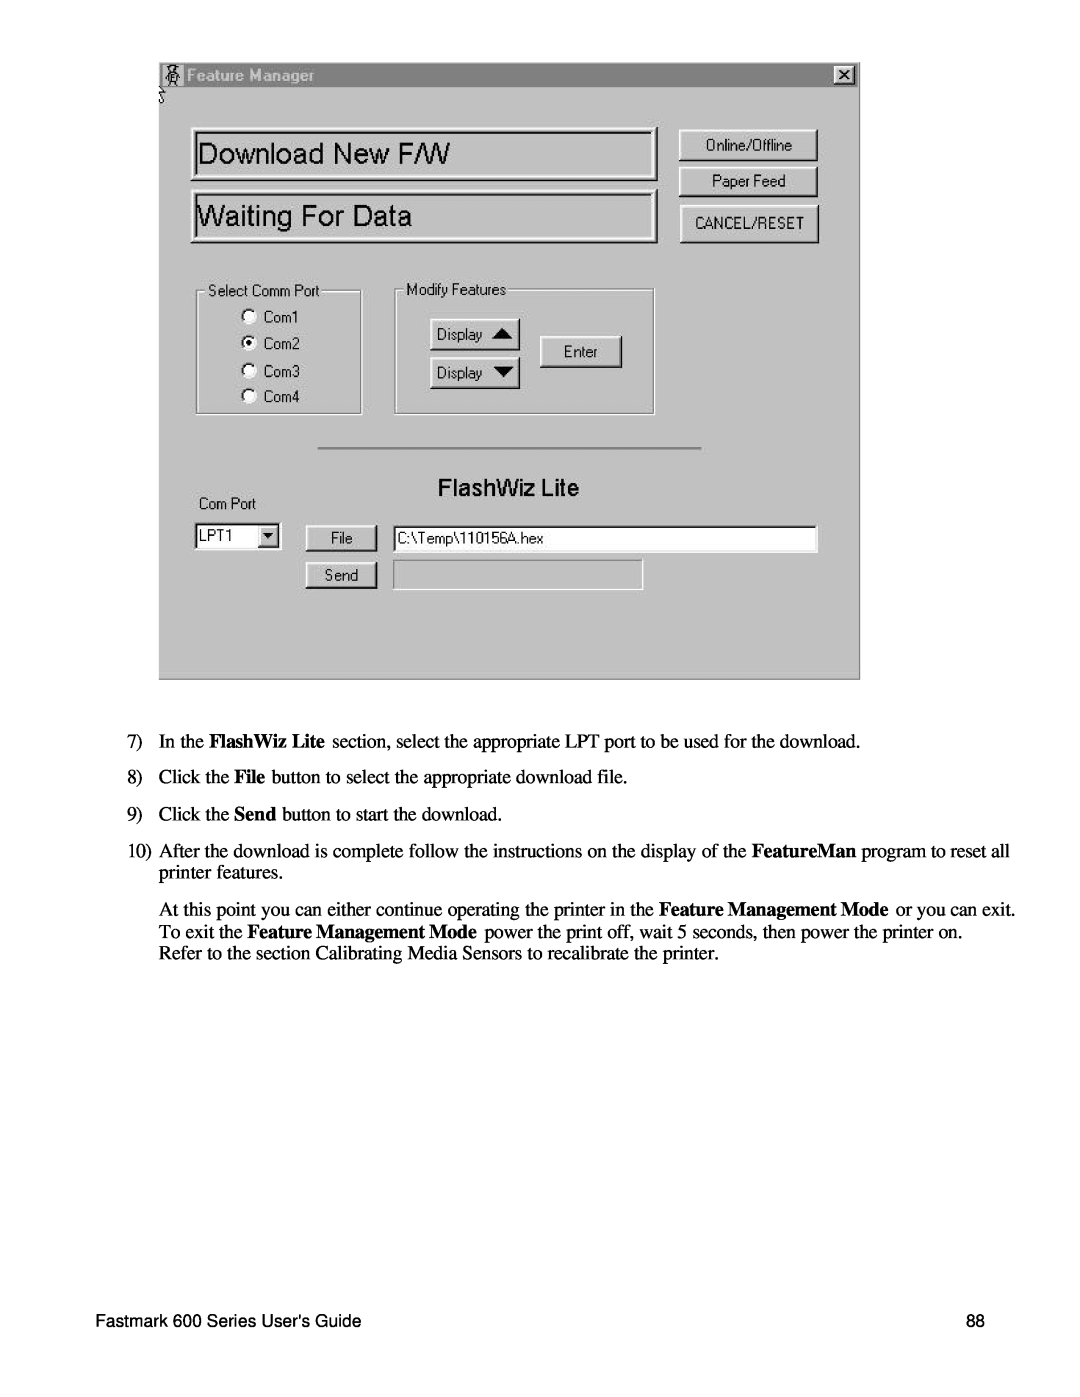 AMT Datasouth 600 manual Click the File button to select the appropriate download file 